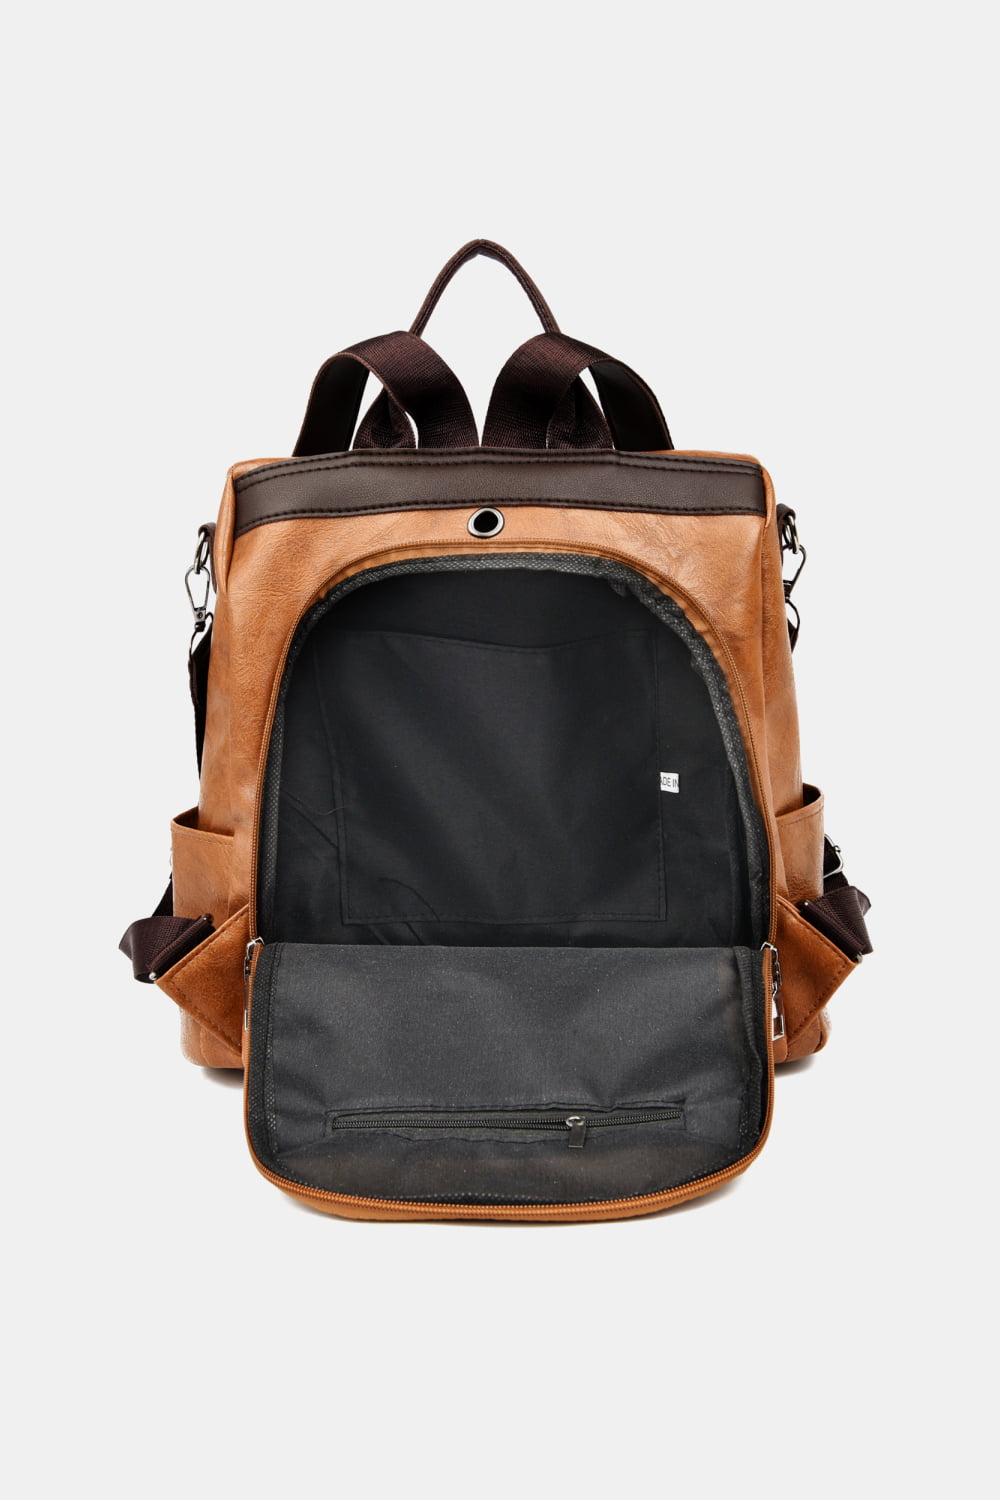 Contrast Color Leather Backpack_17